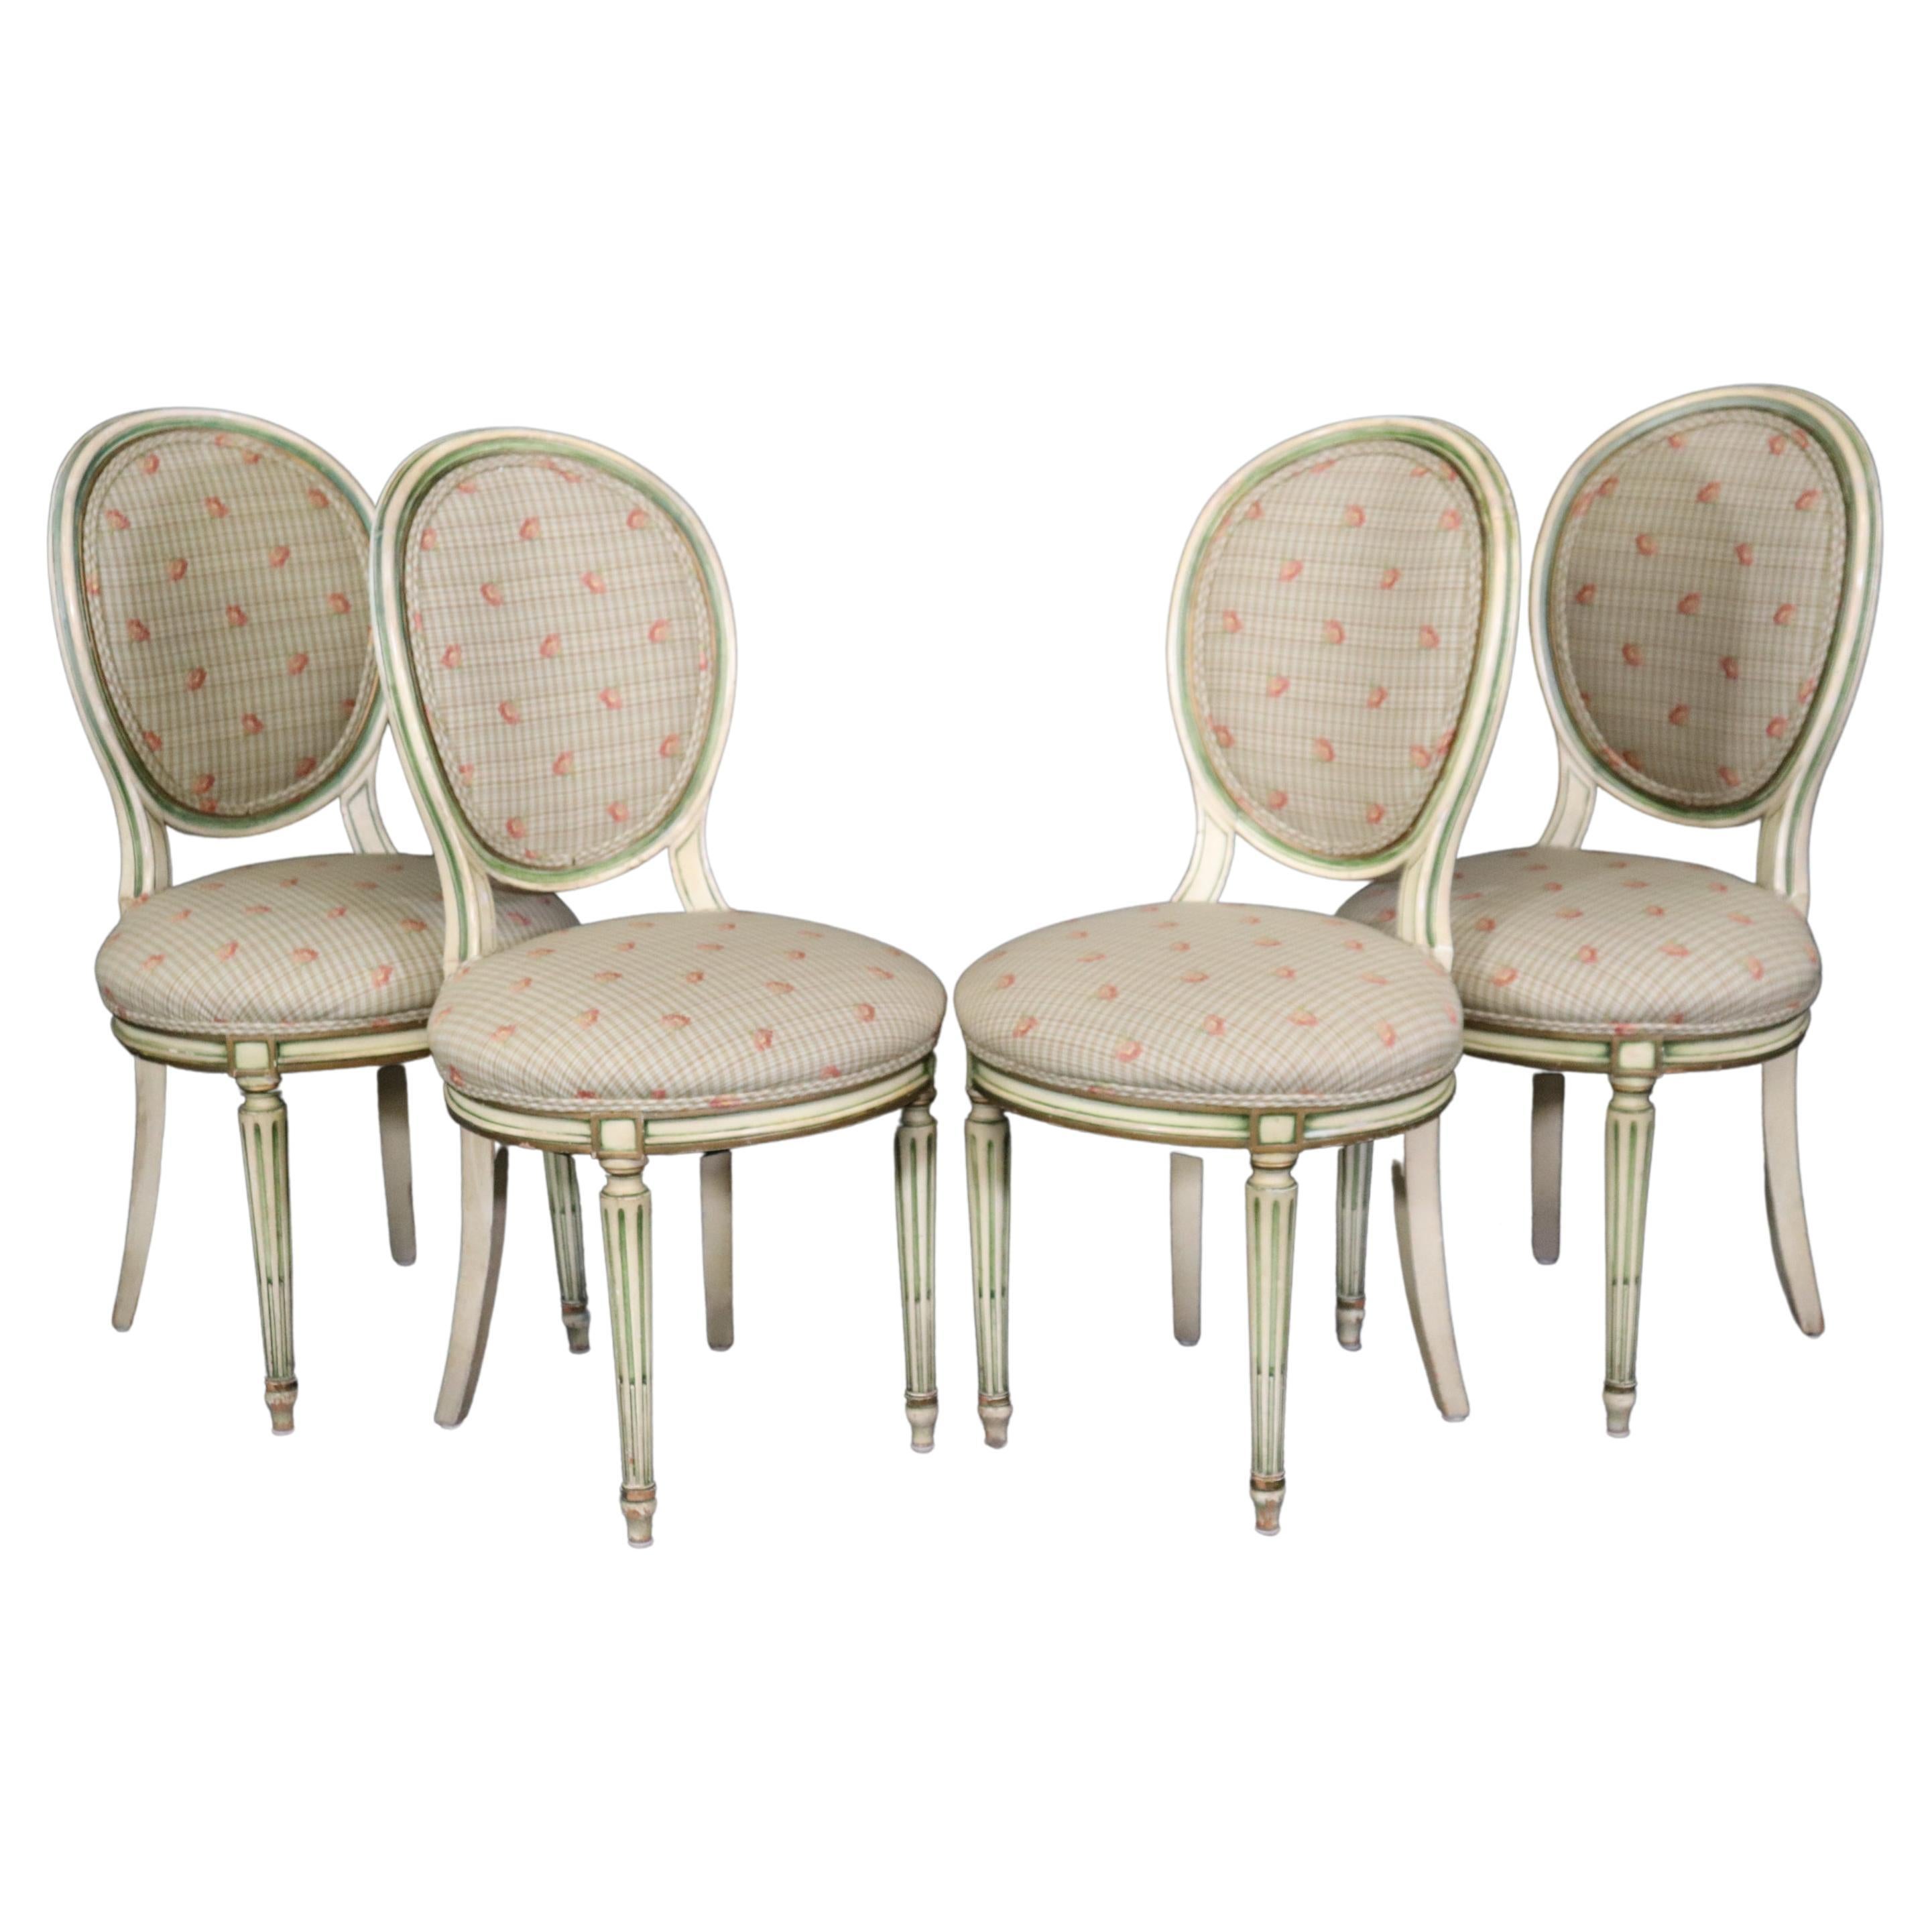 4 Vintage Louis XVI Directoire French Style Dining Chairs With Floral Upholstery For Sale